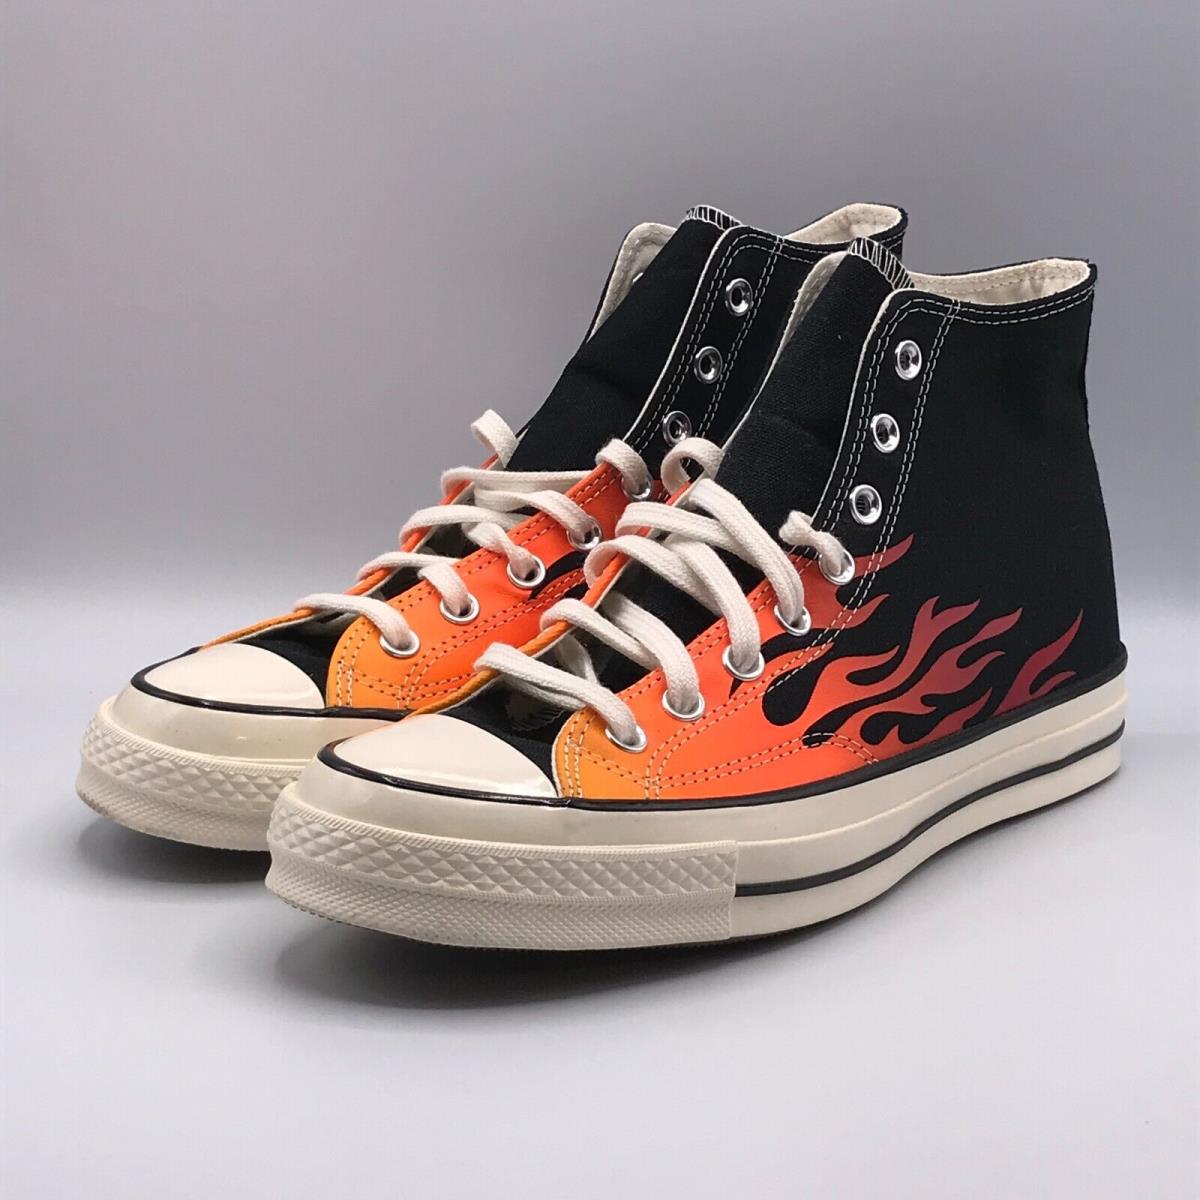 Converse Shoes Mens 10.5 Chuck 70 High Flames Black Red Orange White Sneakers